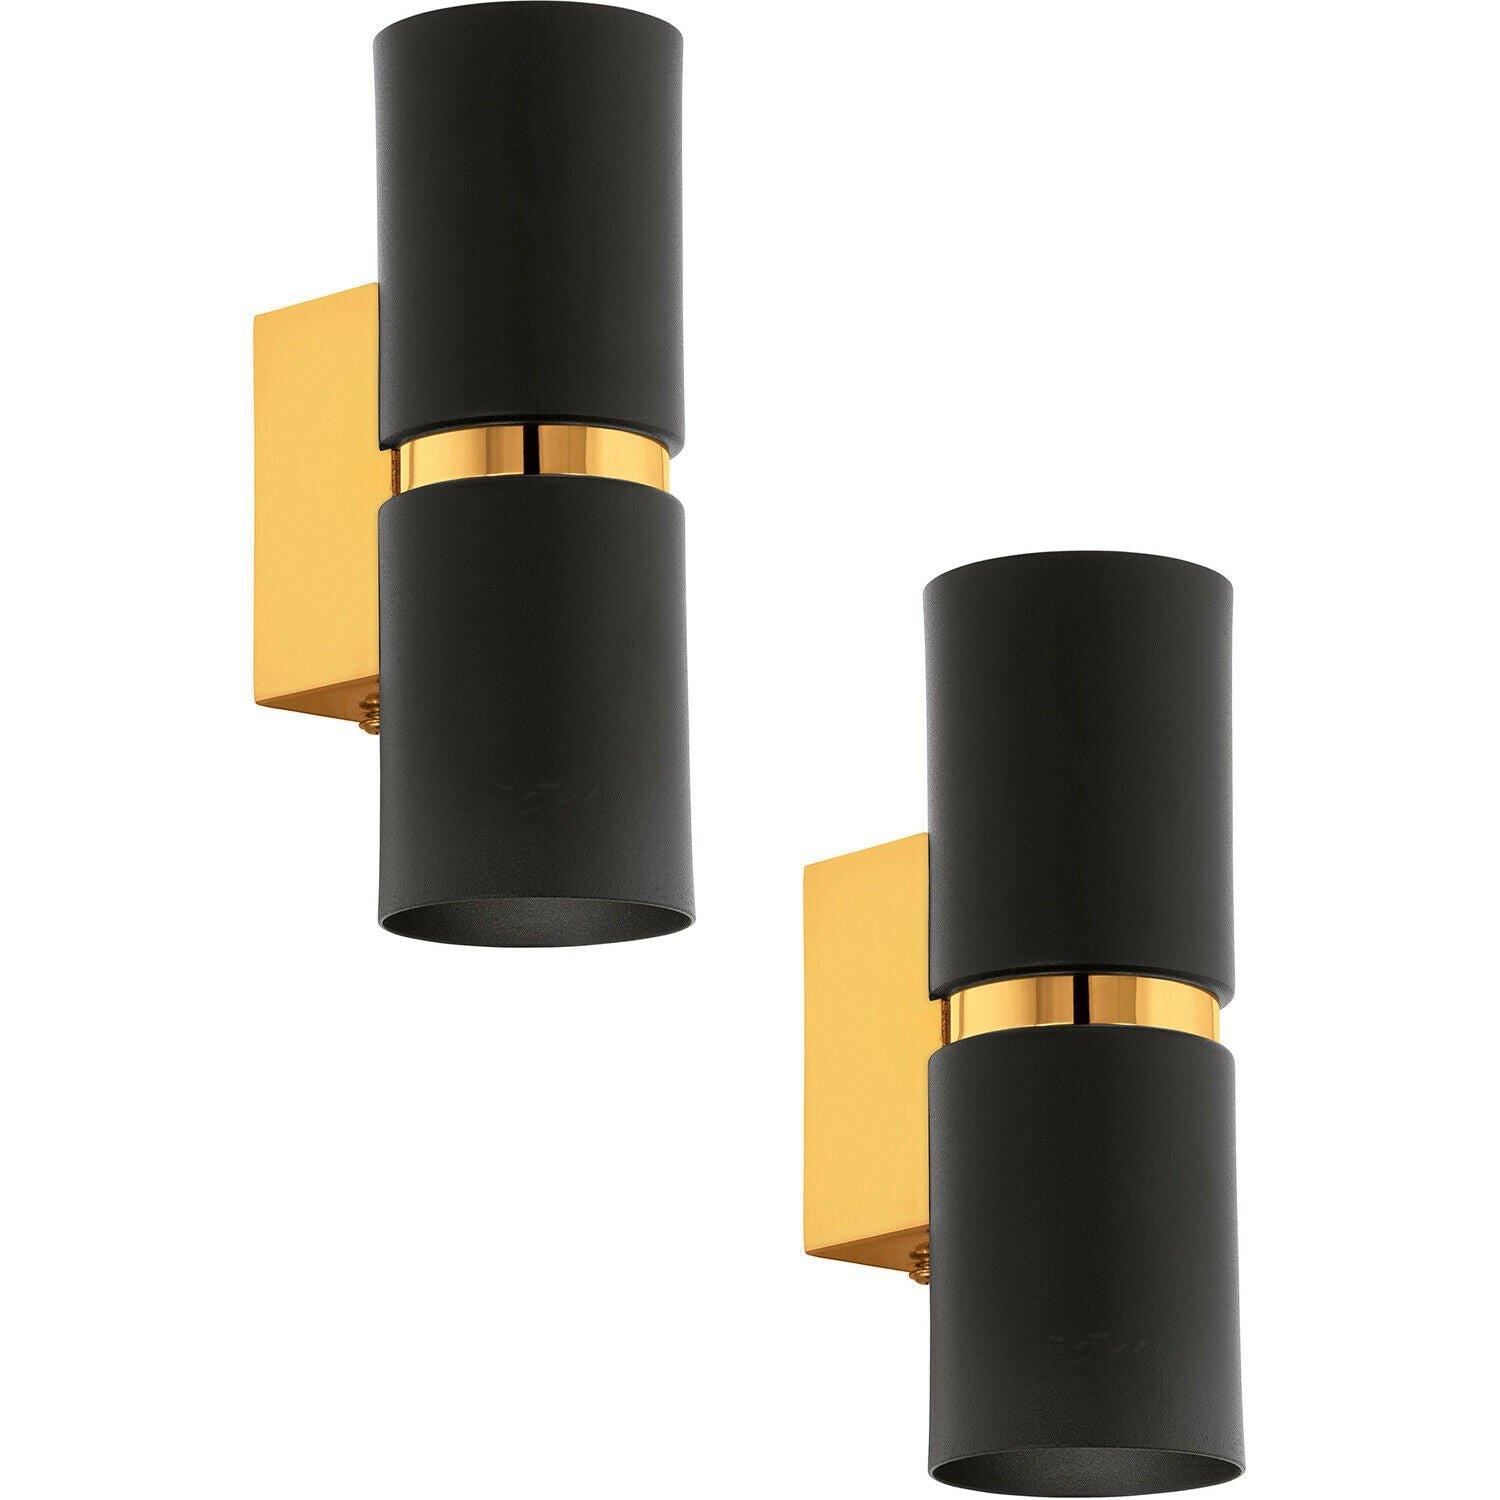 2 PACK Wall Light 2x Black Shades Gold Banding & Back Plate GU10 3.3W Included